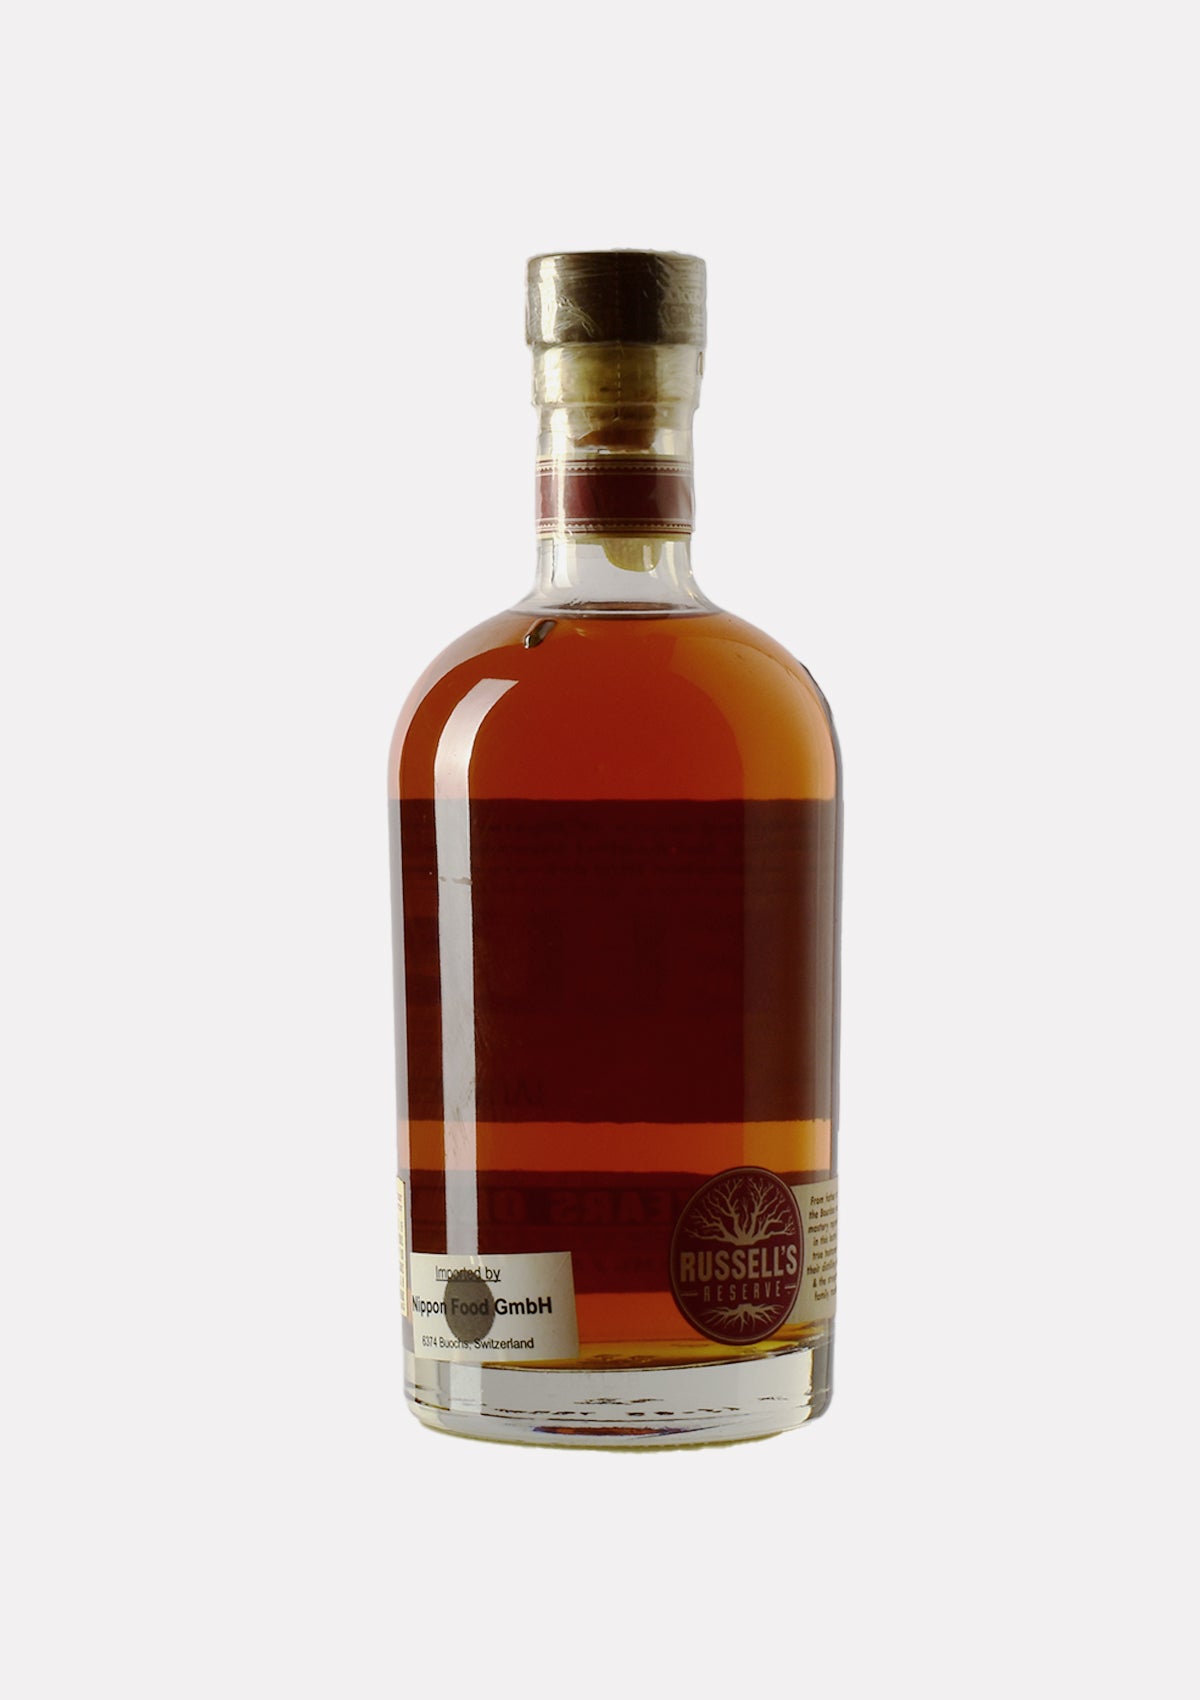 Russel's Reserve Kentucky Straight Bourbon Whiskey 10 years